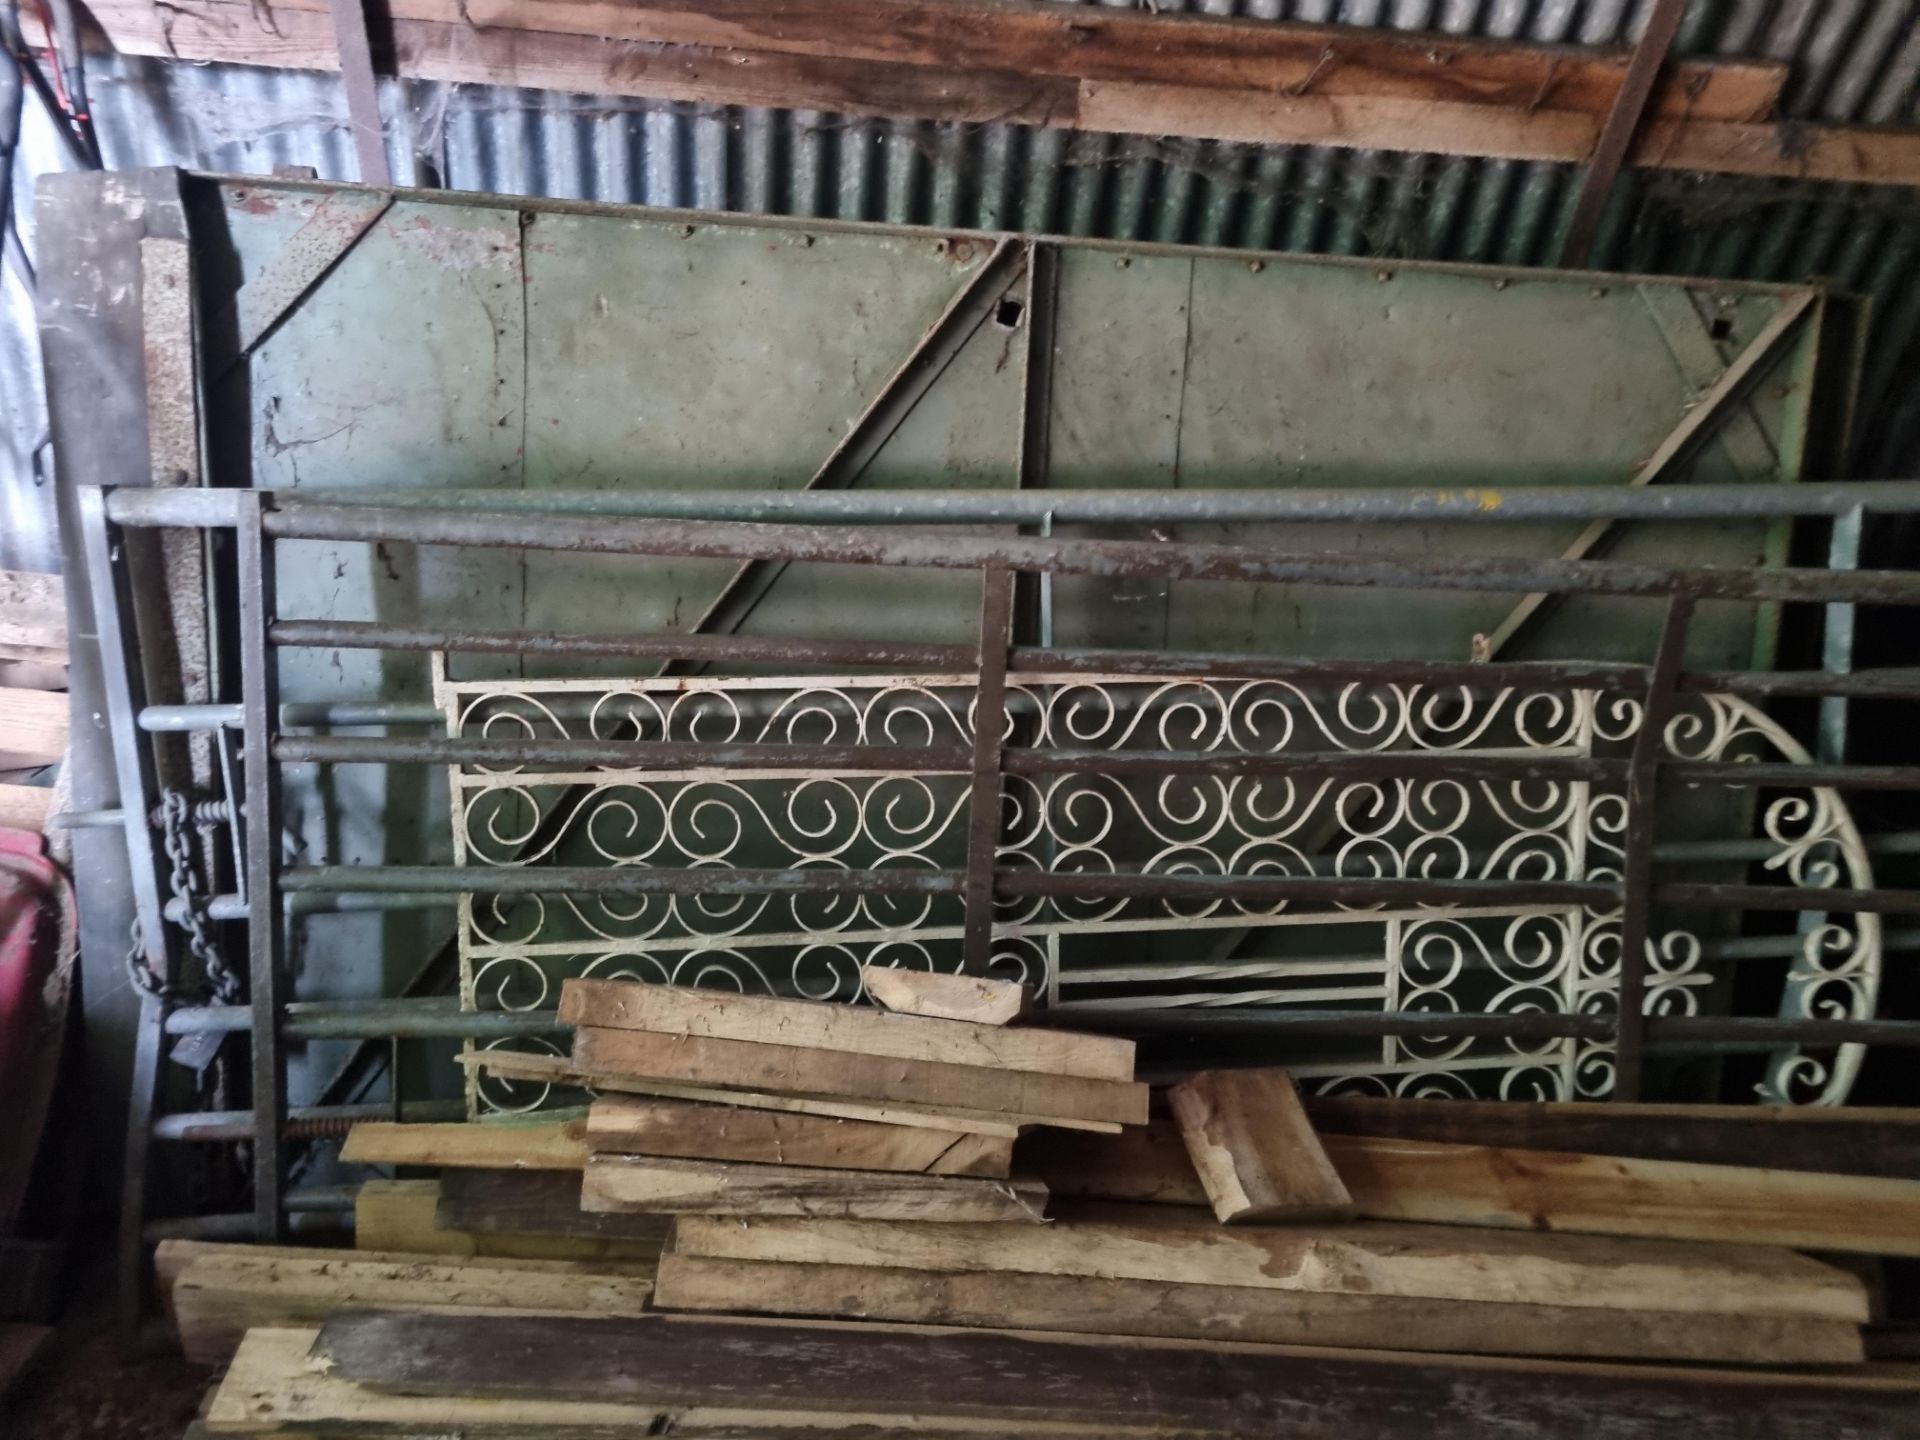 2 x farm rail gates 1 x 4.6m wide and 1 x 2.7m wide complete with a set of metal solid gates as